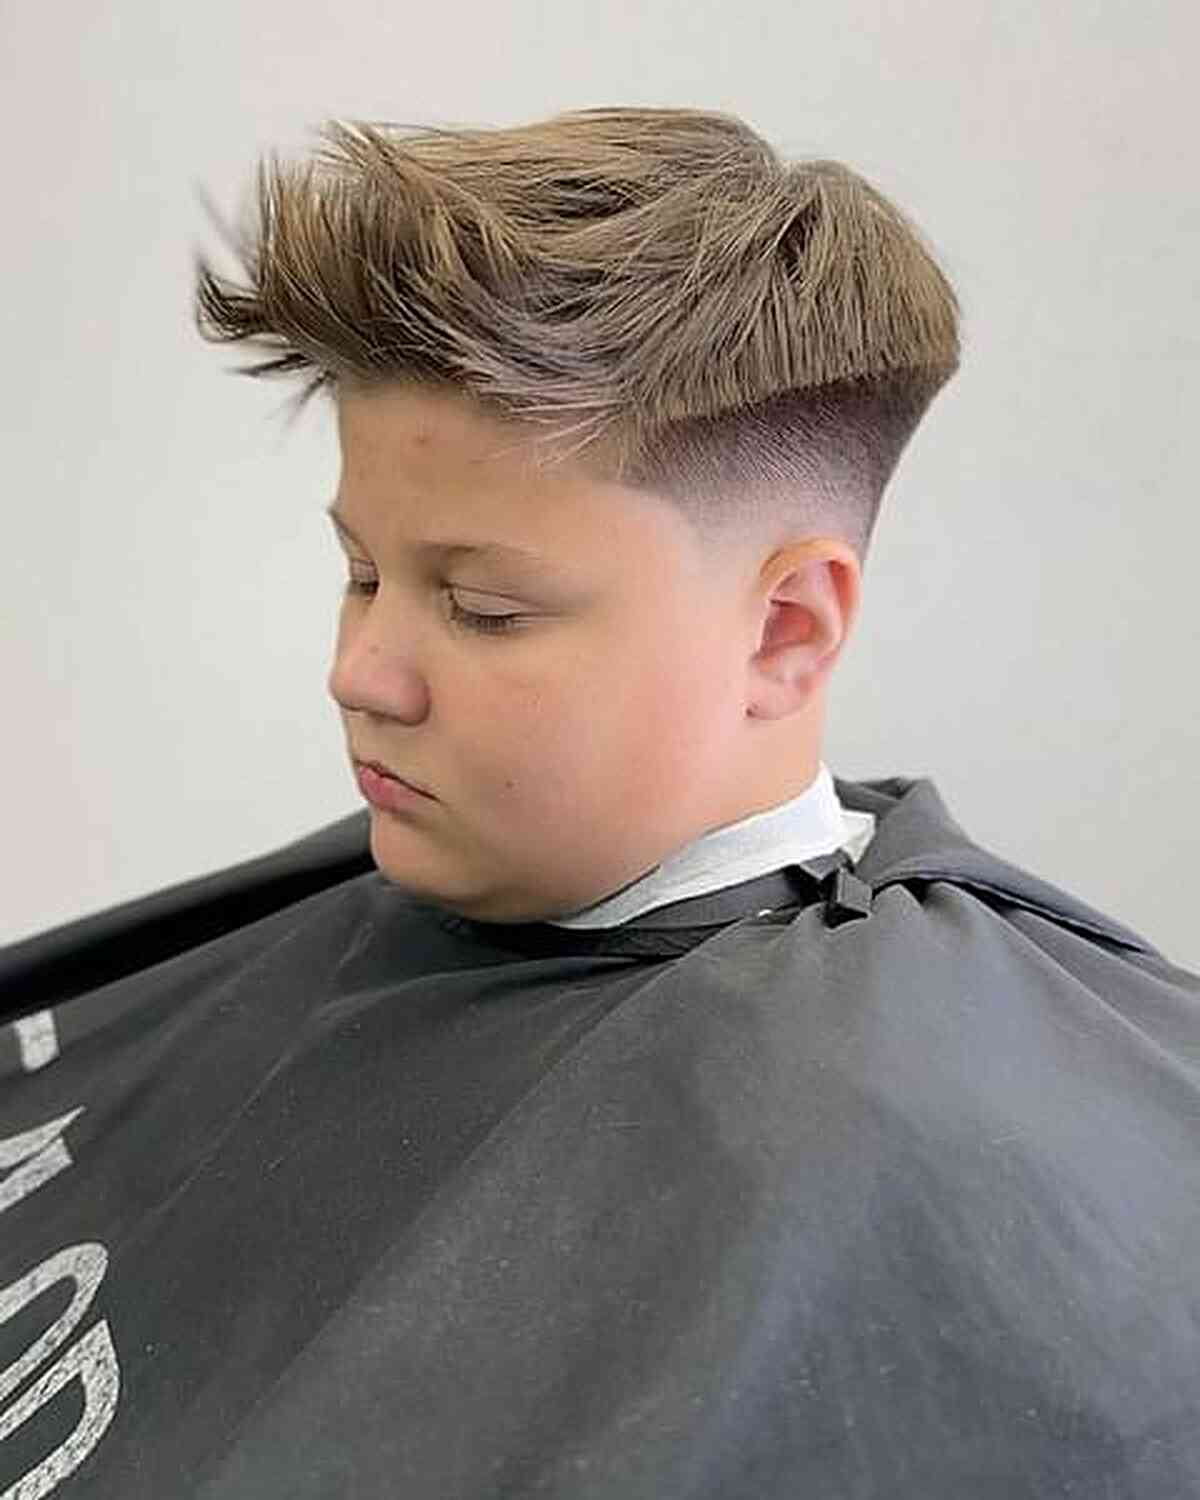 High Quiff with a Sharp Cut for Little Boys